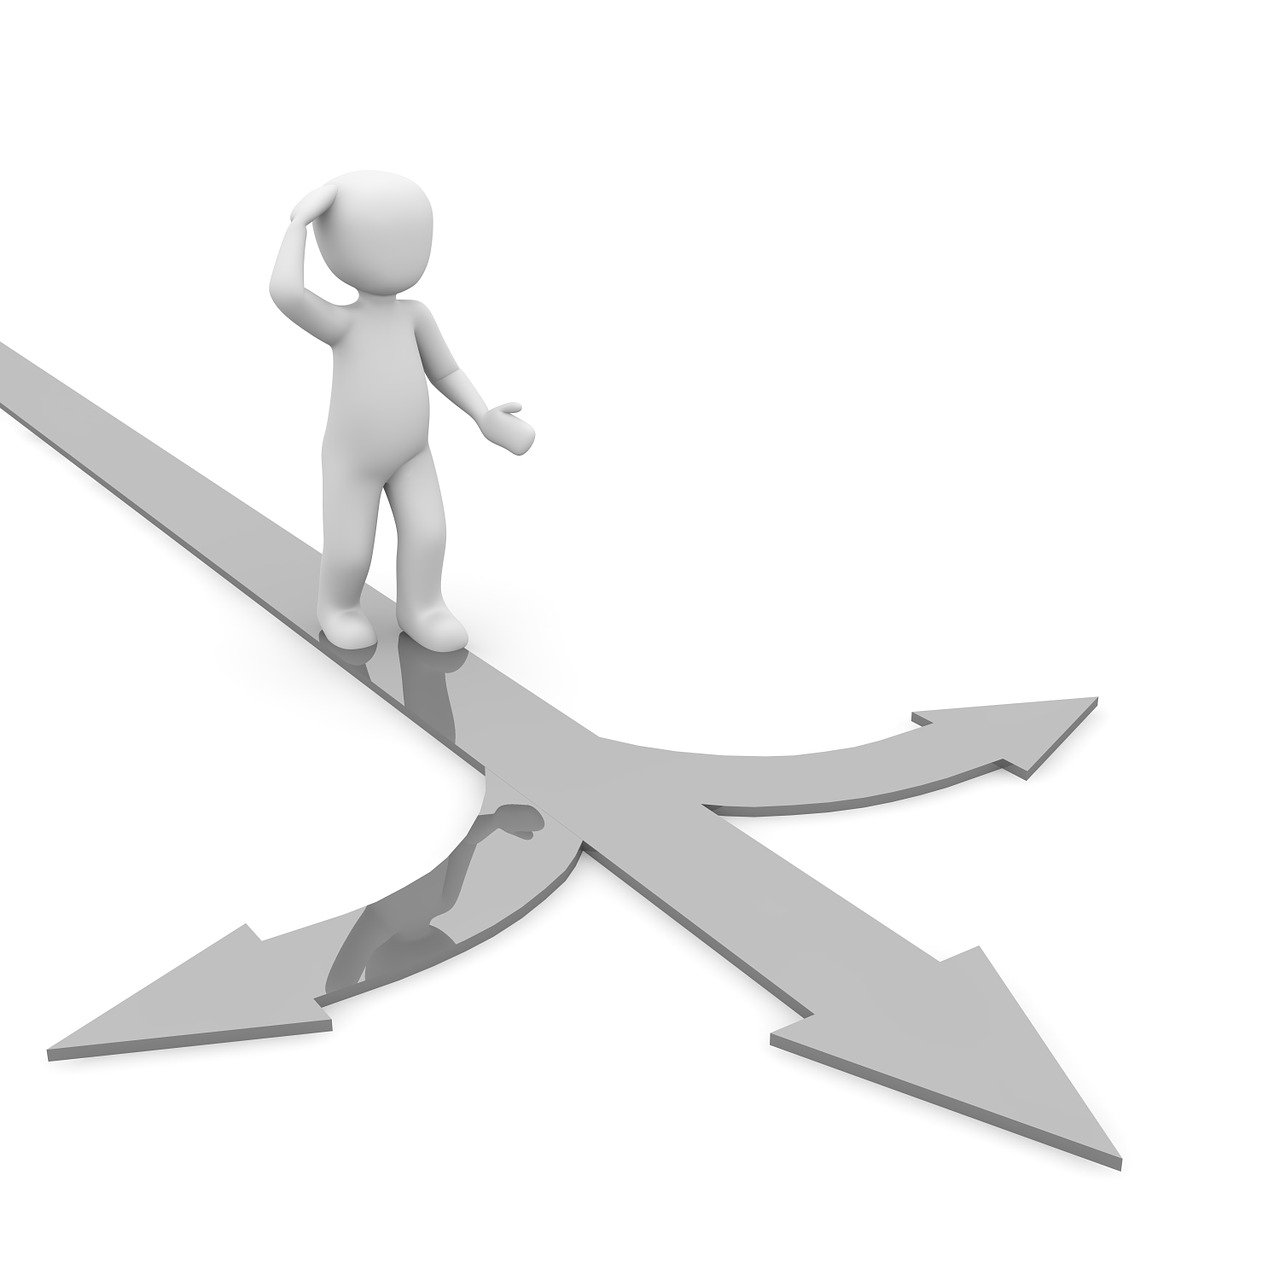 a person standing on two arrows pointing in opposite directions, a picture, ambient occlusion:3, single file, file photo, paradox